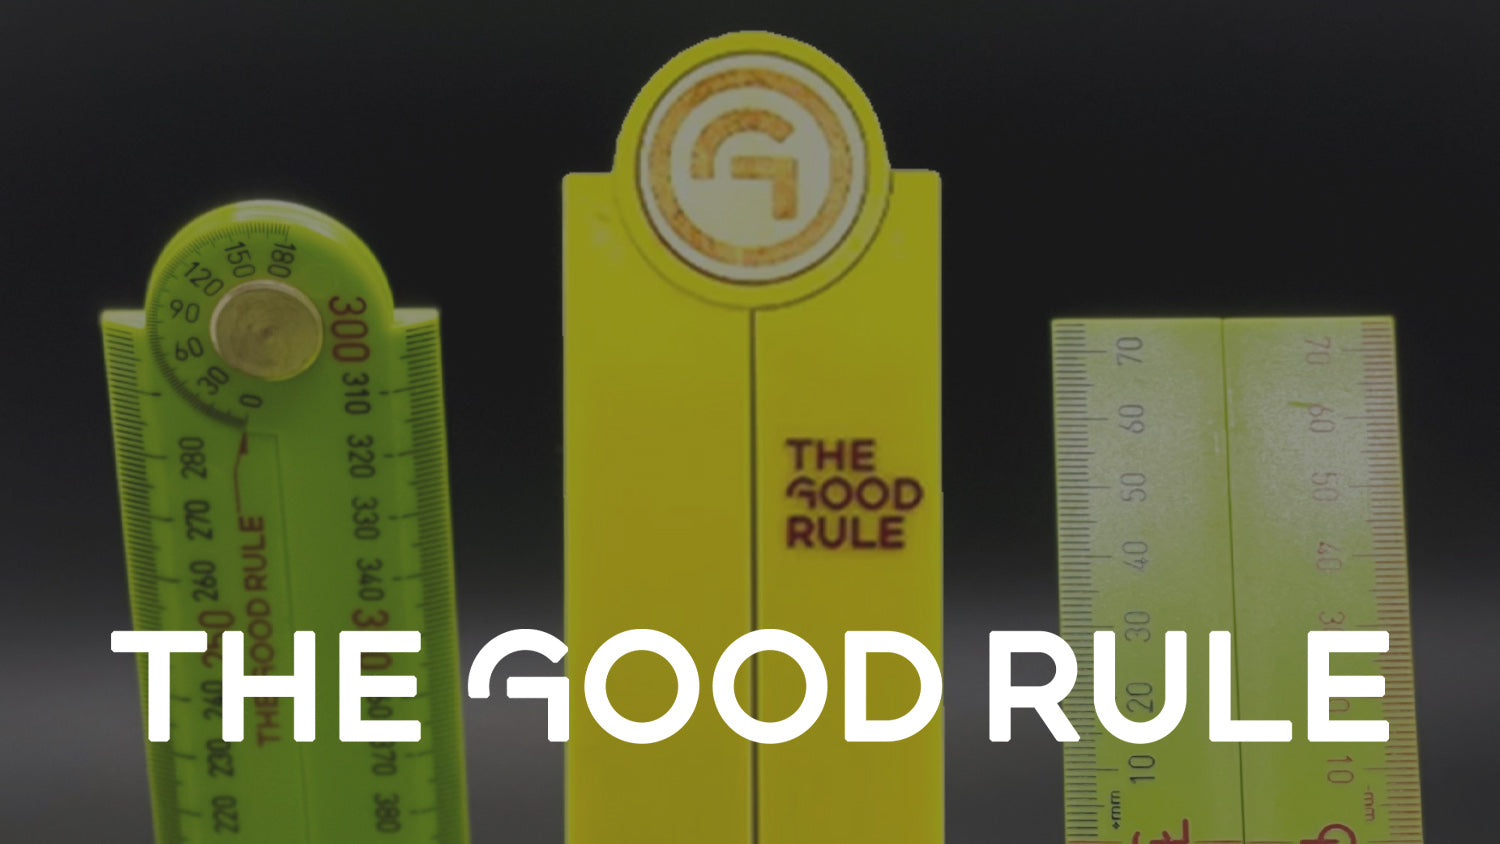 Here's 30% off your Good Rule order